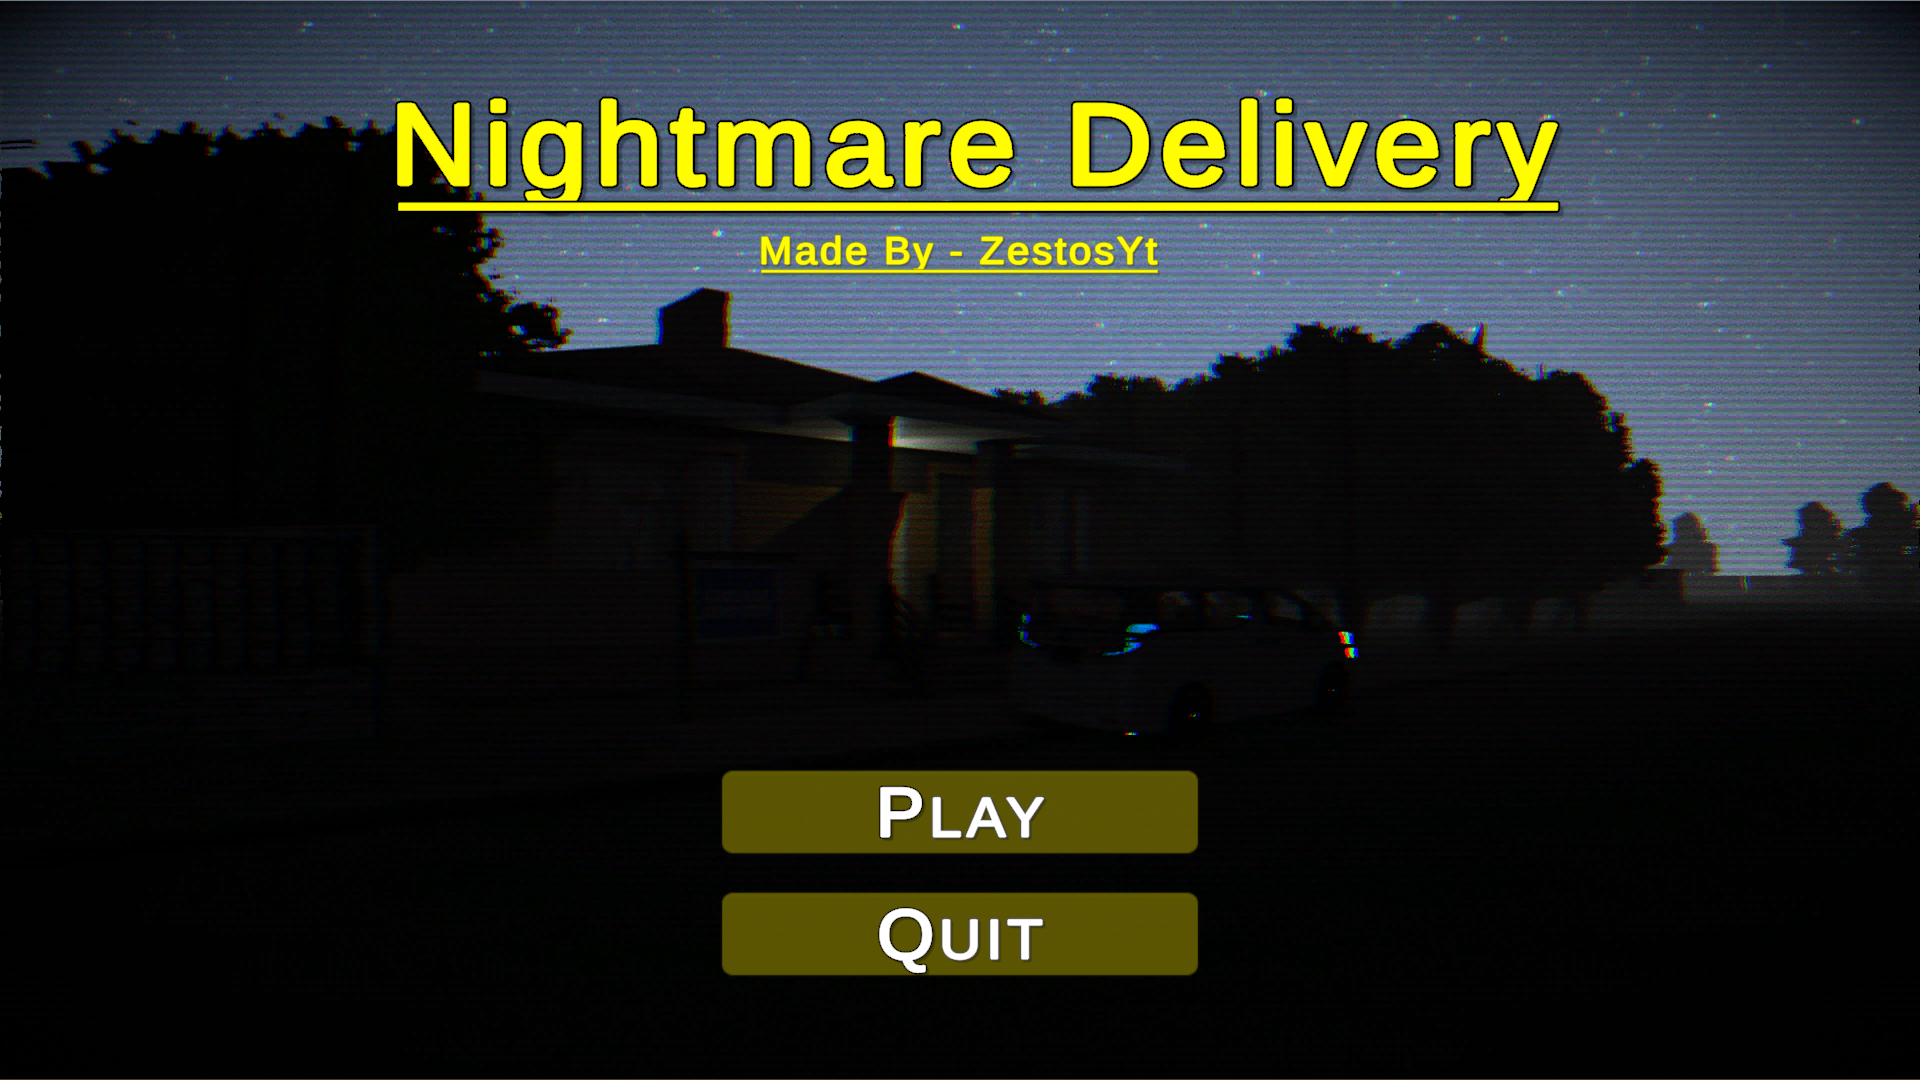 NightMare Delivery